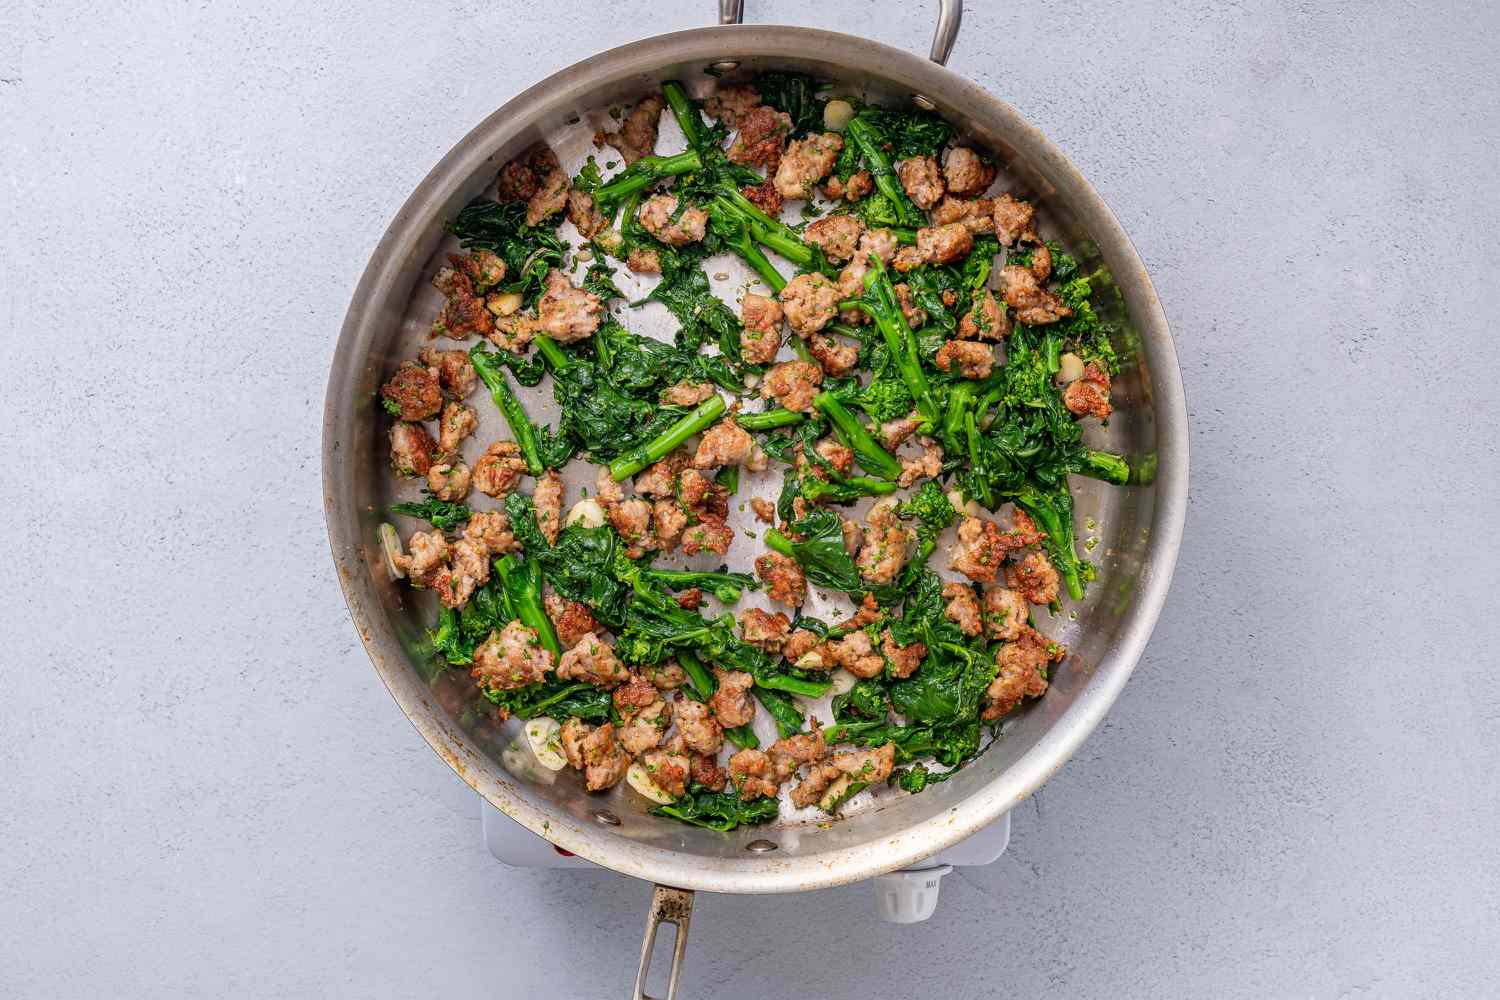 Broccoli rabe added to the pan with sausage